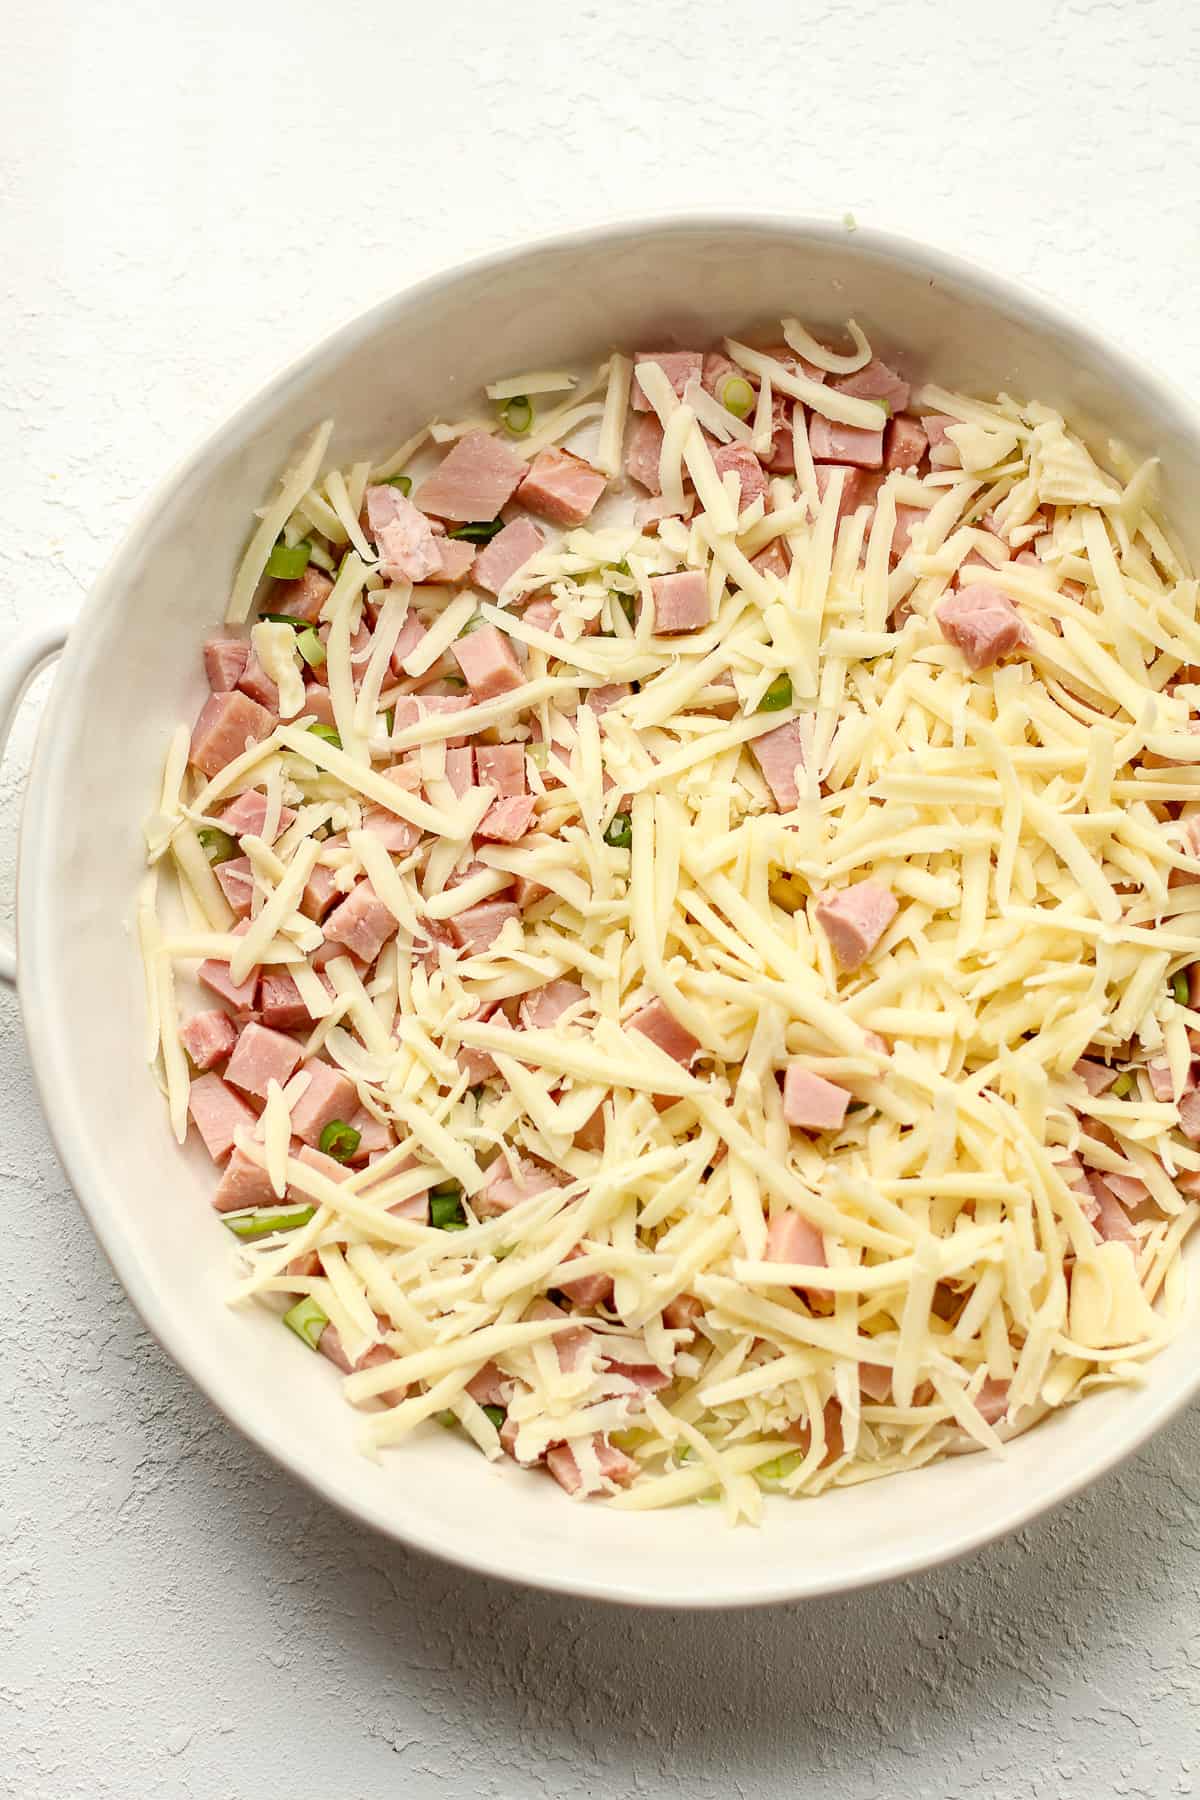 The dish with the ham, green onions, and gruyere cheese.